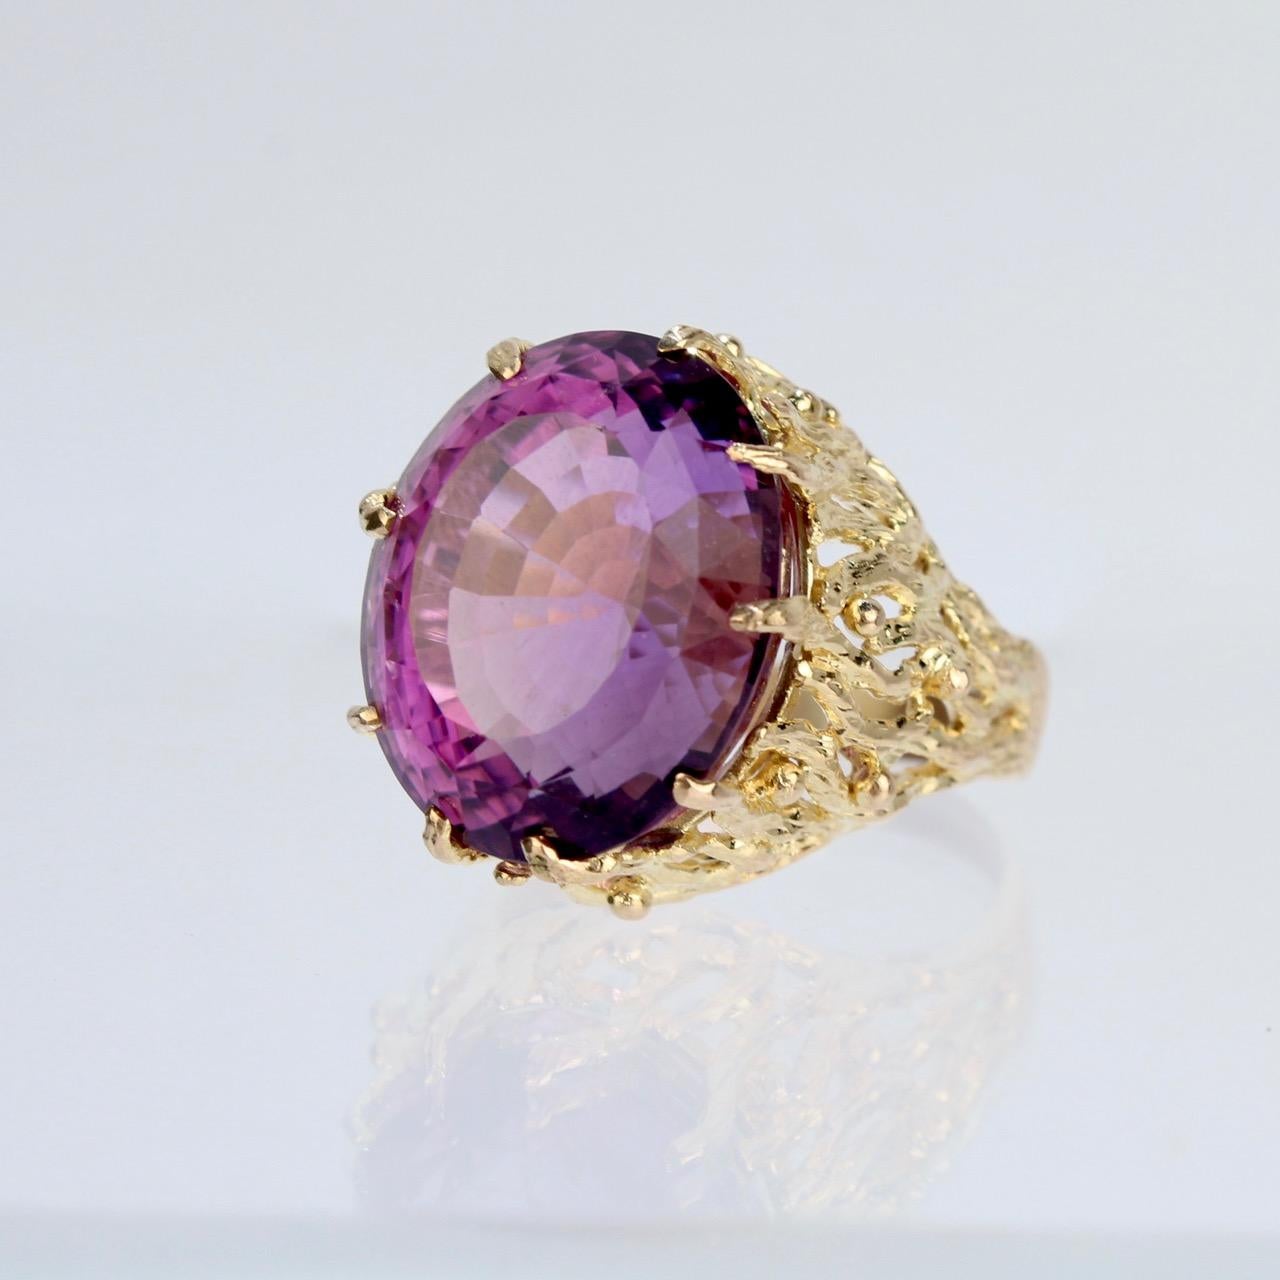 A large Brutalist gold and amethyst ring.

With a substantial oval-cut amethyst gemstone (20+ carat) prong set in a sinuous, intertwined structural 14k gold Brutalist setting. The gold setting has ample openwork that offsets the weight and size of